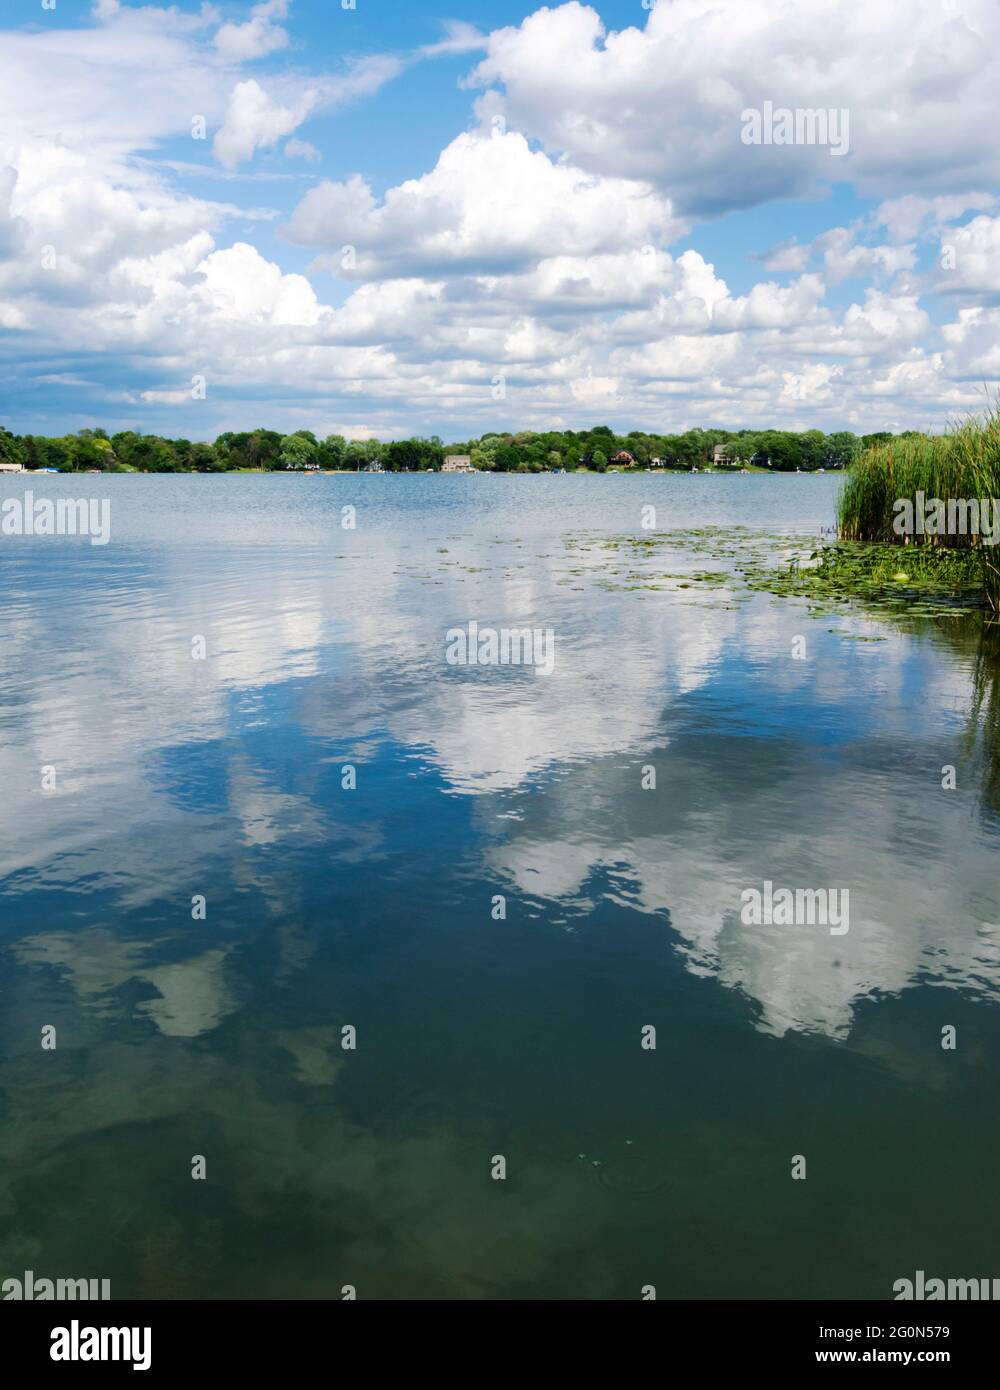 Looking out over a rural Wisconsin lake, Ashippun Lake in Waukesha county.  Cumulus clouds are reflected in the calm waters.  Shoreline is covered by Stock Photo